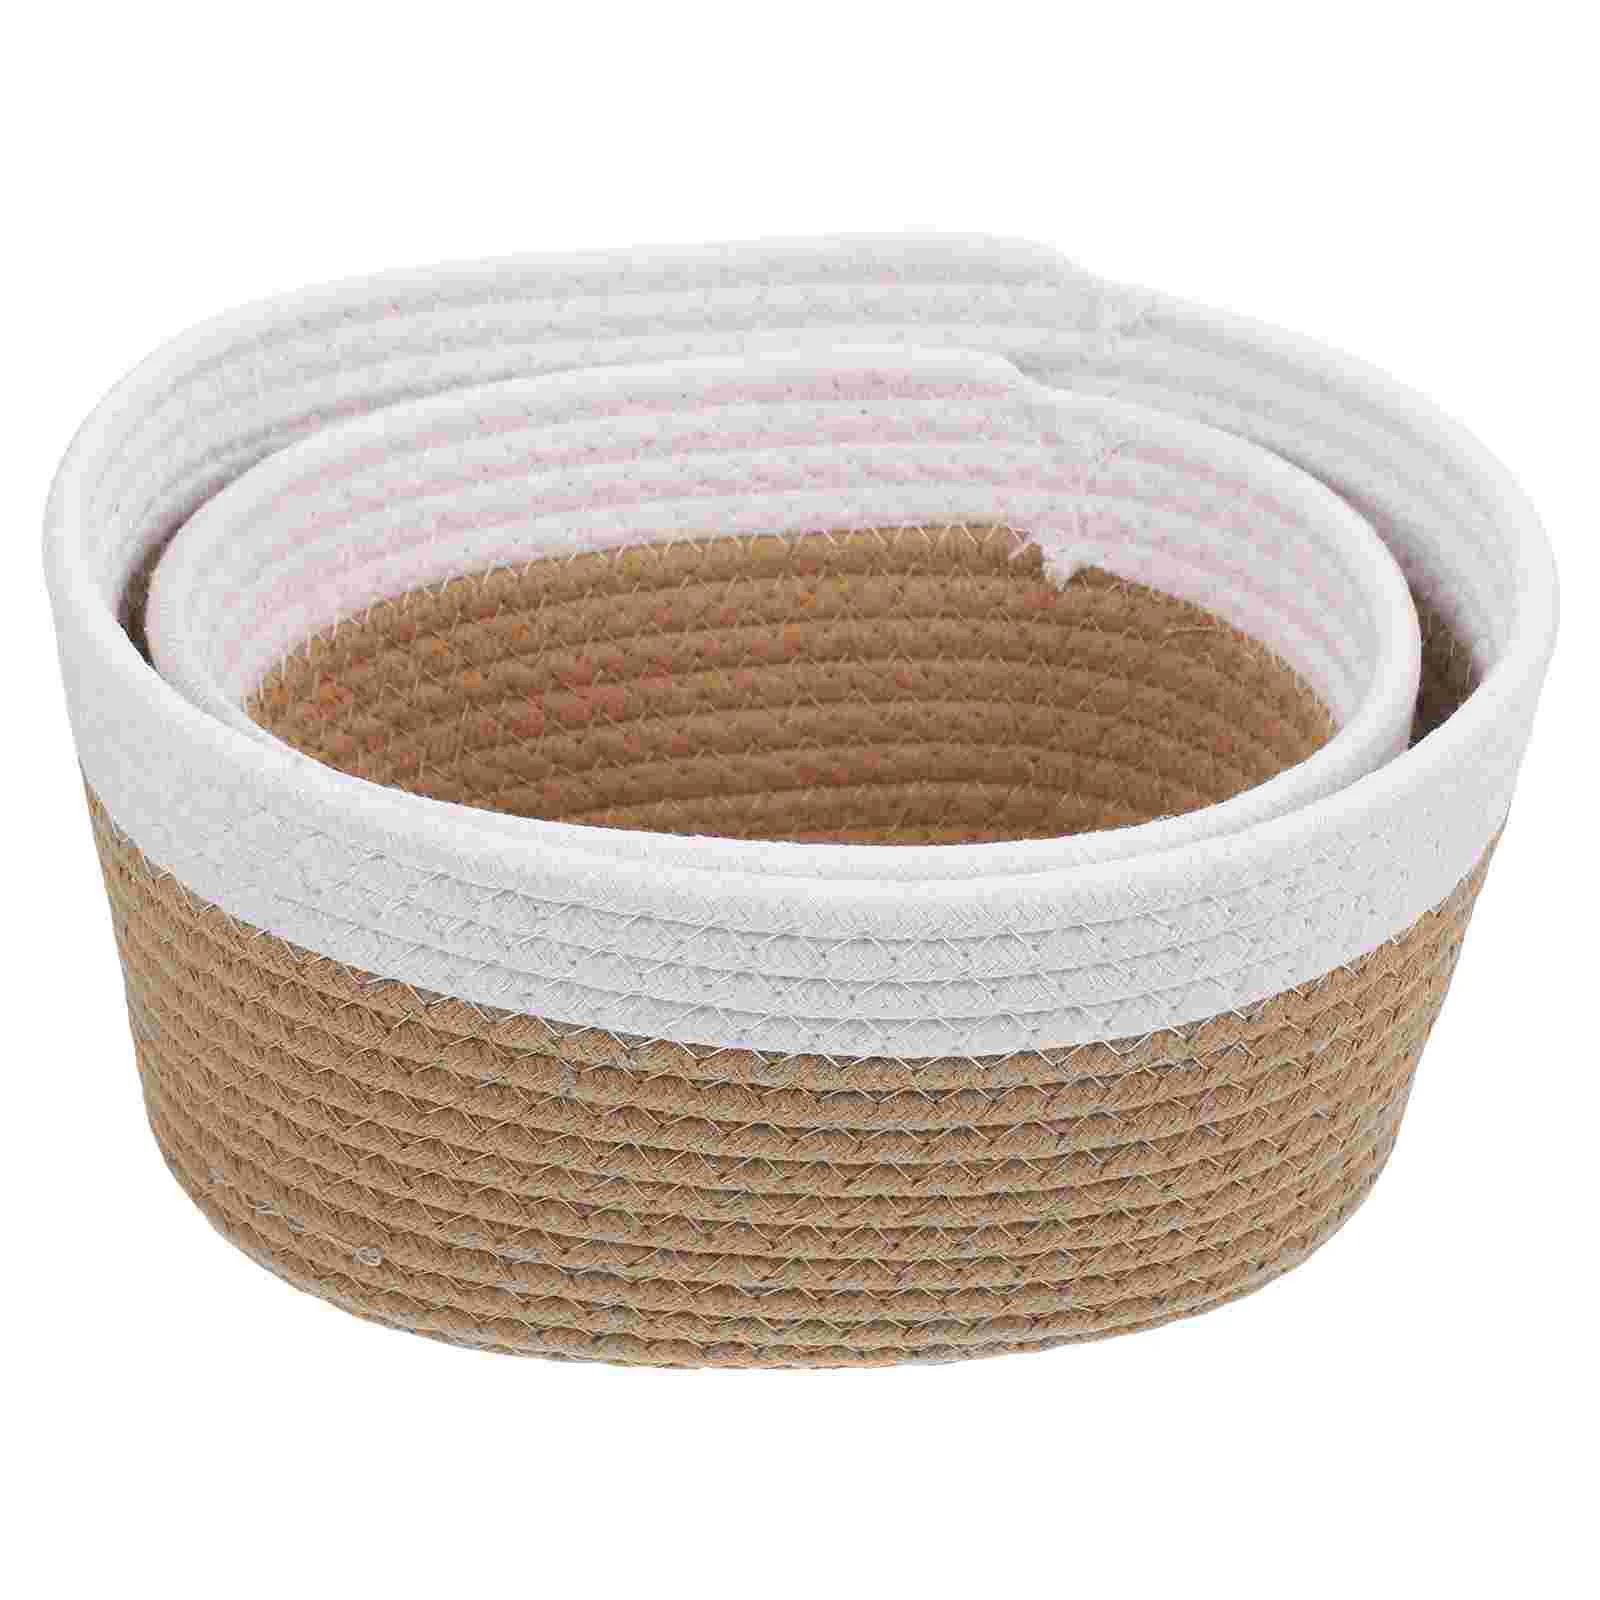 

Woven Storage Basket Desktop Organizer Baskets Snack Home Accessory Bedroom Sundries Makeup Supplies Cotton Rope Small Laundry